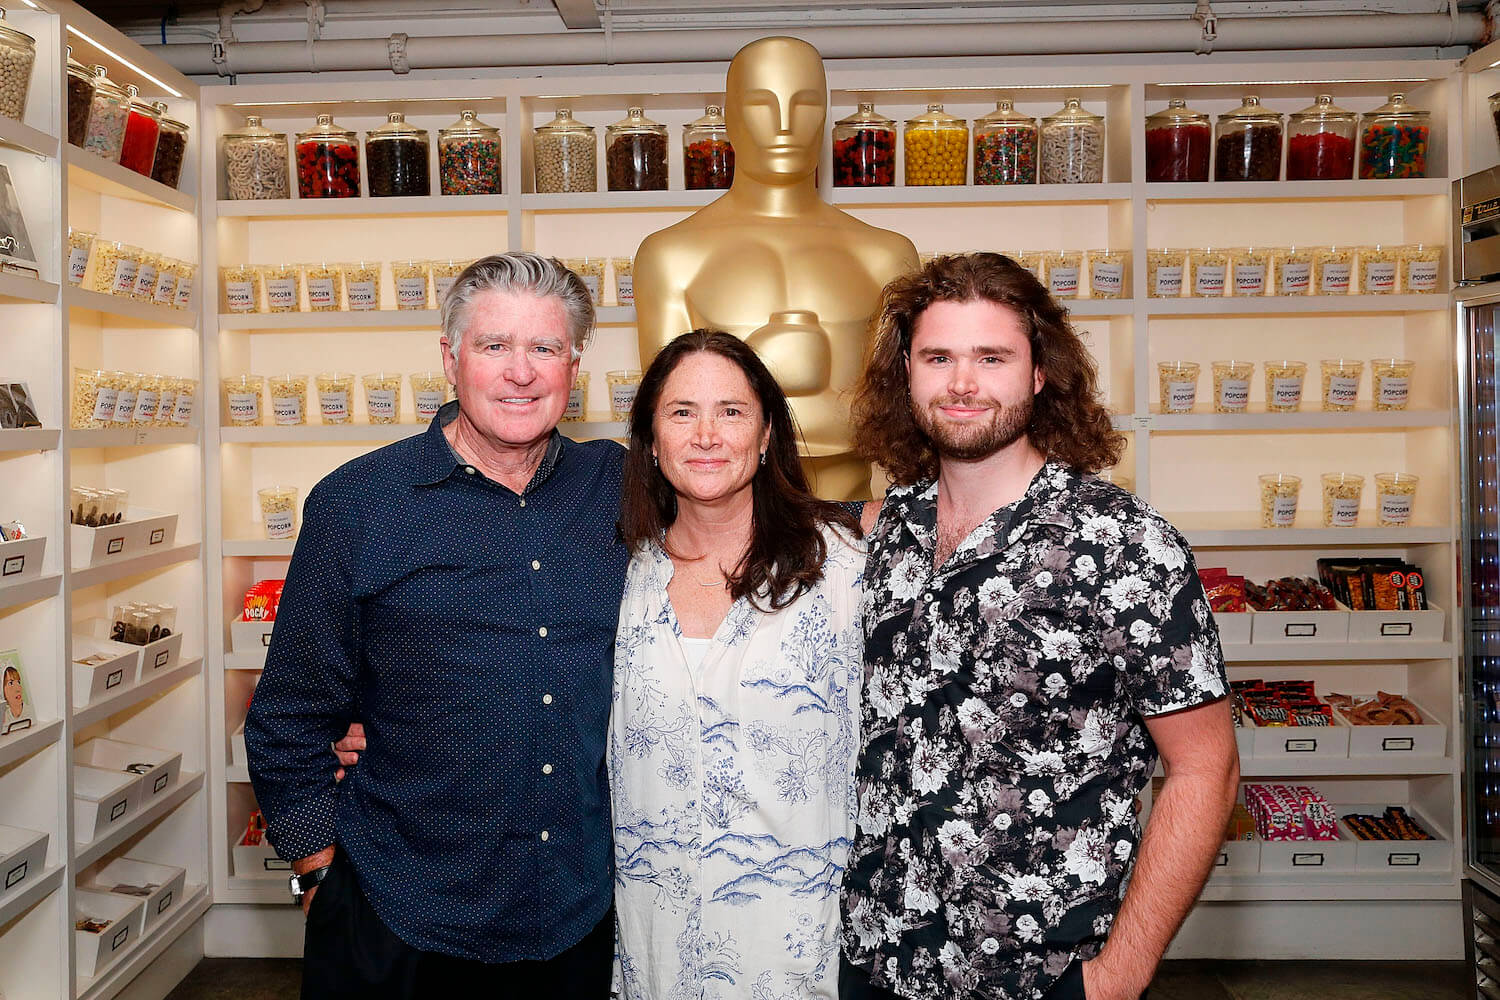 Treat Williams with his wife, Pam Van Sant, and his son, Gill Williams